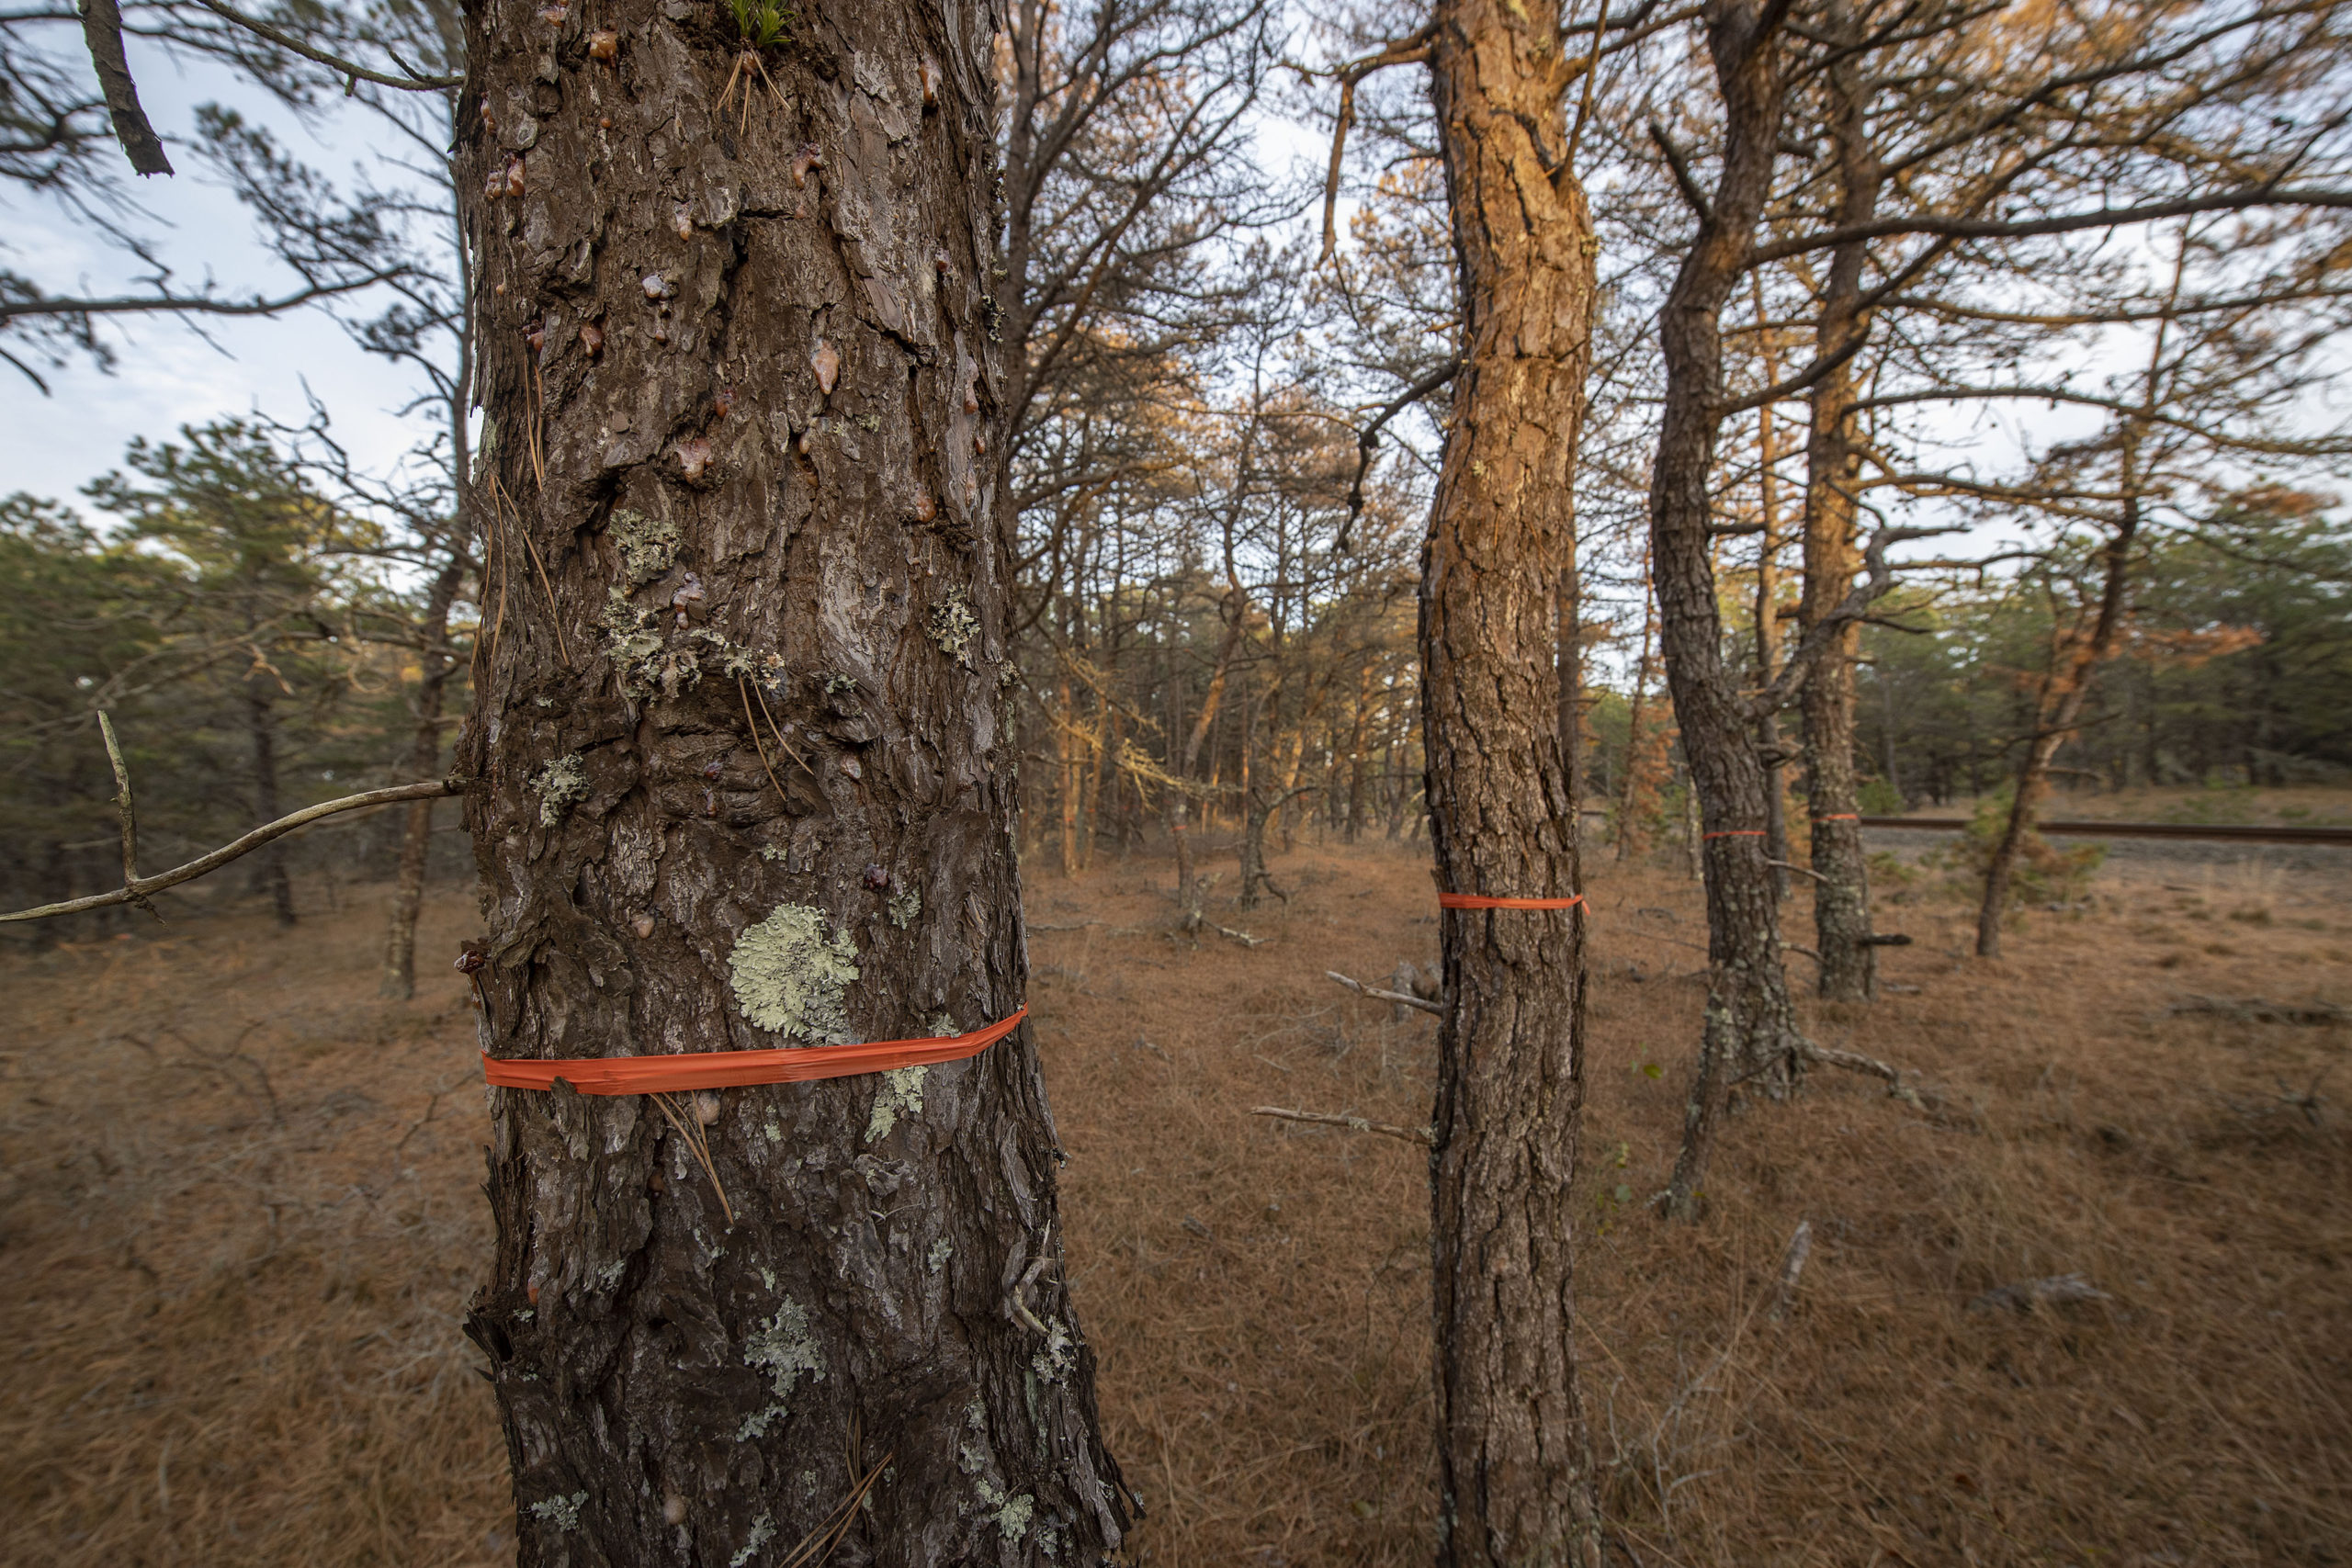 Southern pine beetles, and their telltale bubbles of sap oozing from tree bark, have been found in hundreds of trees in Napeague State Park.